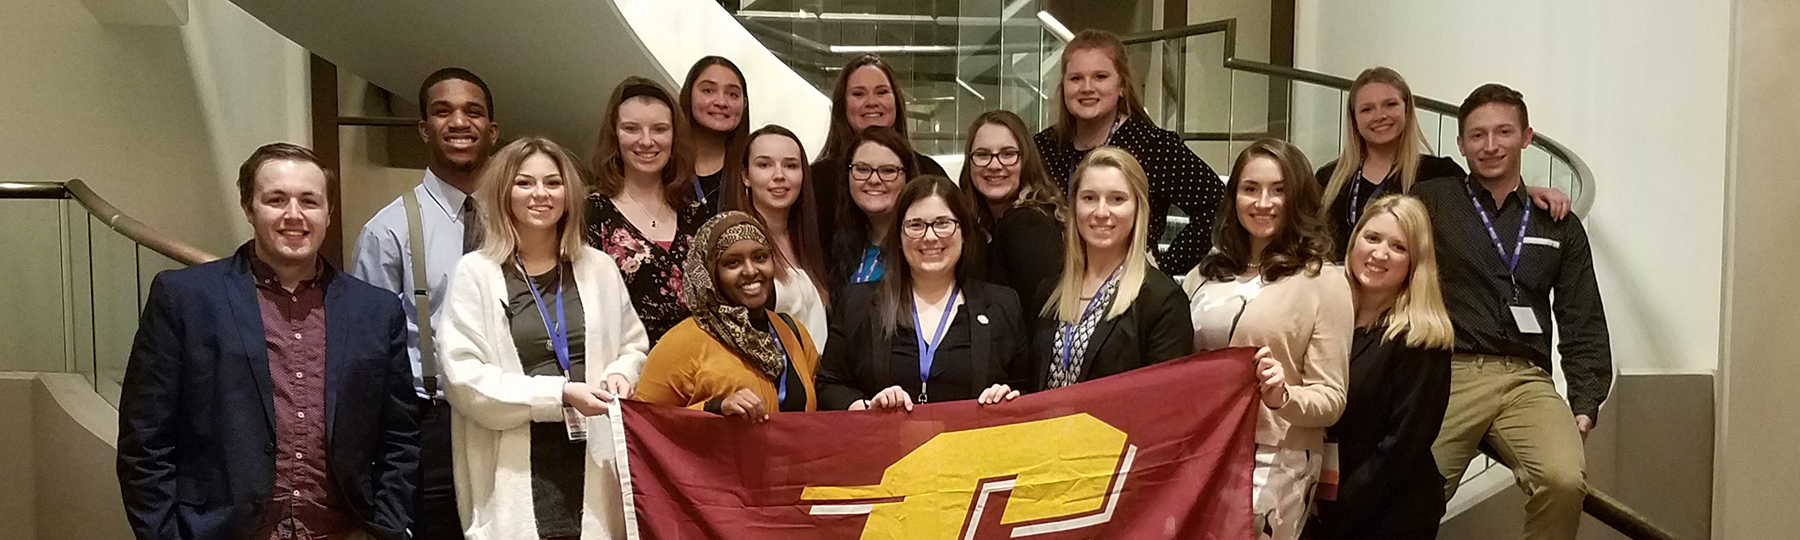 Students hold a CMU flag while standing on stairs during Alliance Management Institute Conference.